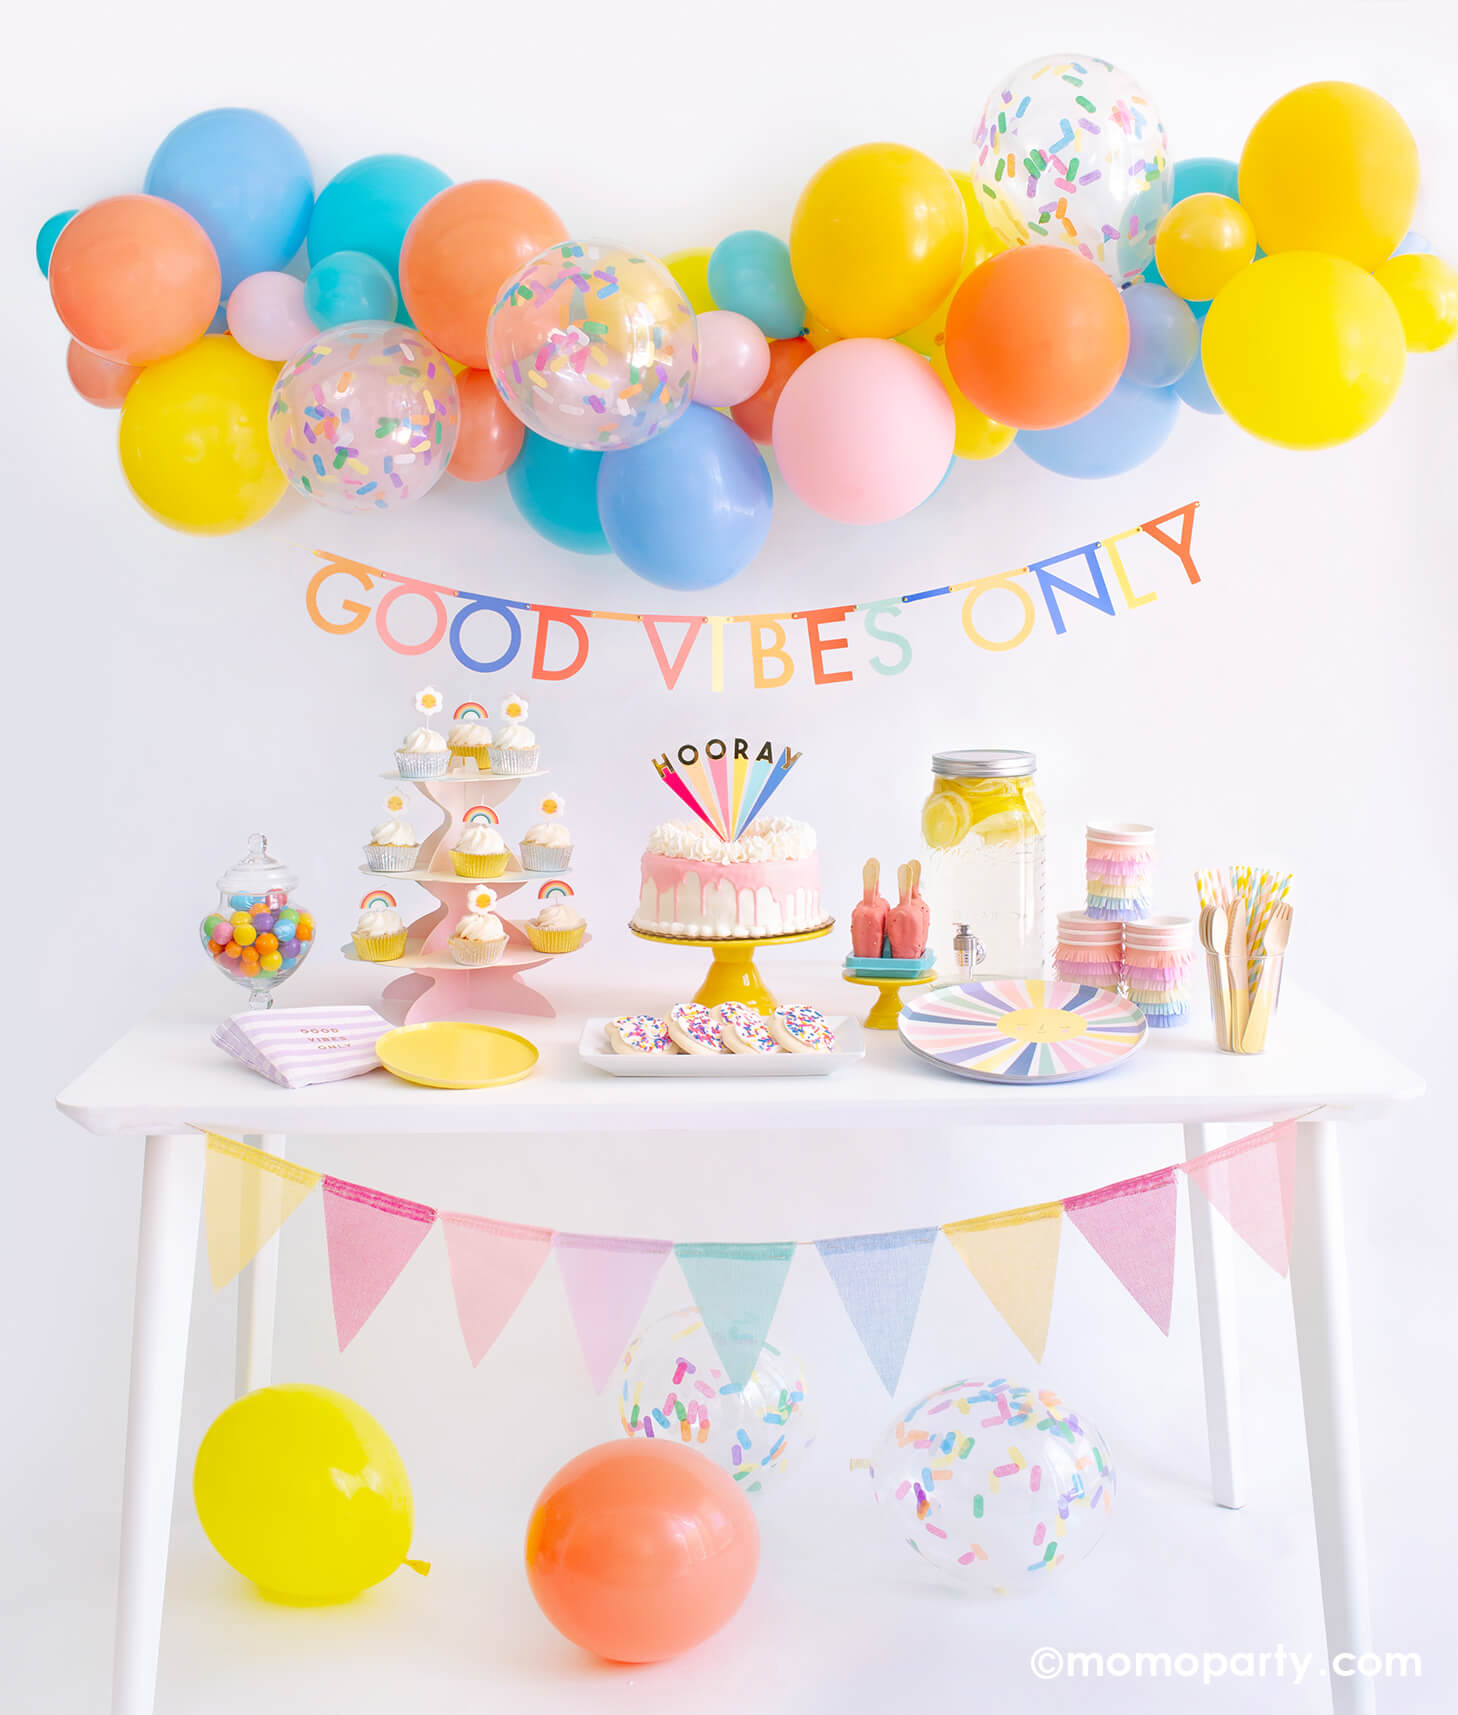 Momo party Good Vibes Only Party Box Kit. Included Meri Meri Rainbow Sun Dinner Plates, Oh Happy Day Yellow Side Plates, Meri Meri Rainbow Sun Fringe Cups, Party Deco Good Vibes Napkins, Yellow Wooden Cutlery, Mixed Pastel Striped Straws, cupcake with rainbow and daisy candles. Meri Meri Hooray cake topper on a dripping cake, colorful gumballs, Lemonade on the table. Meri Meri Multicolor Bunting Banner spelled as "good vibes only" text , Good Vibes 6-foot- Balloon Garland Cloud as decoration.